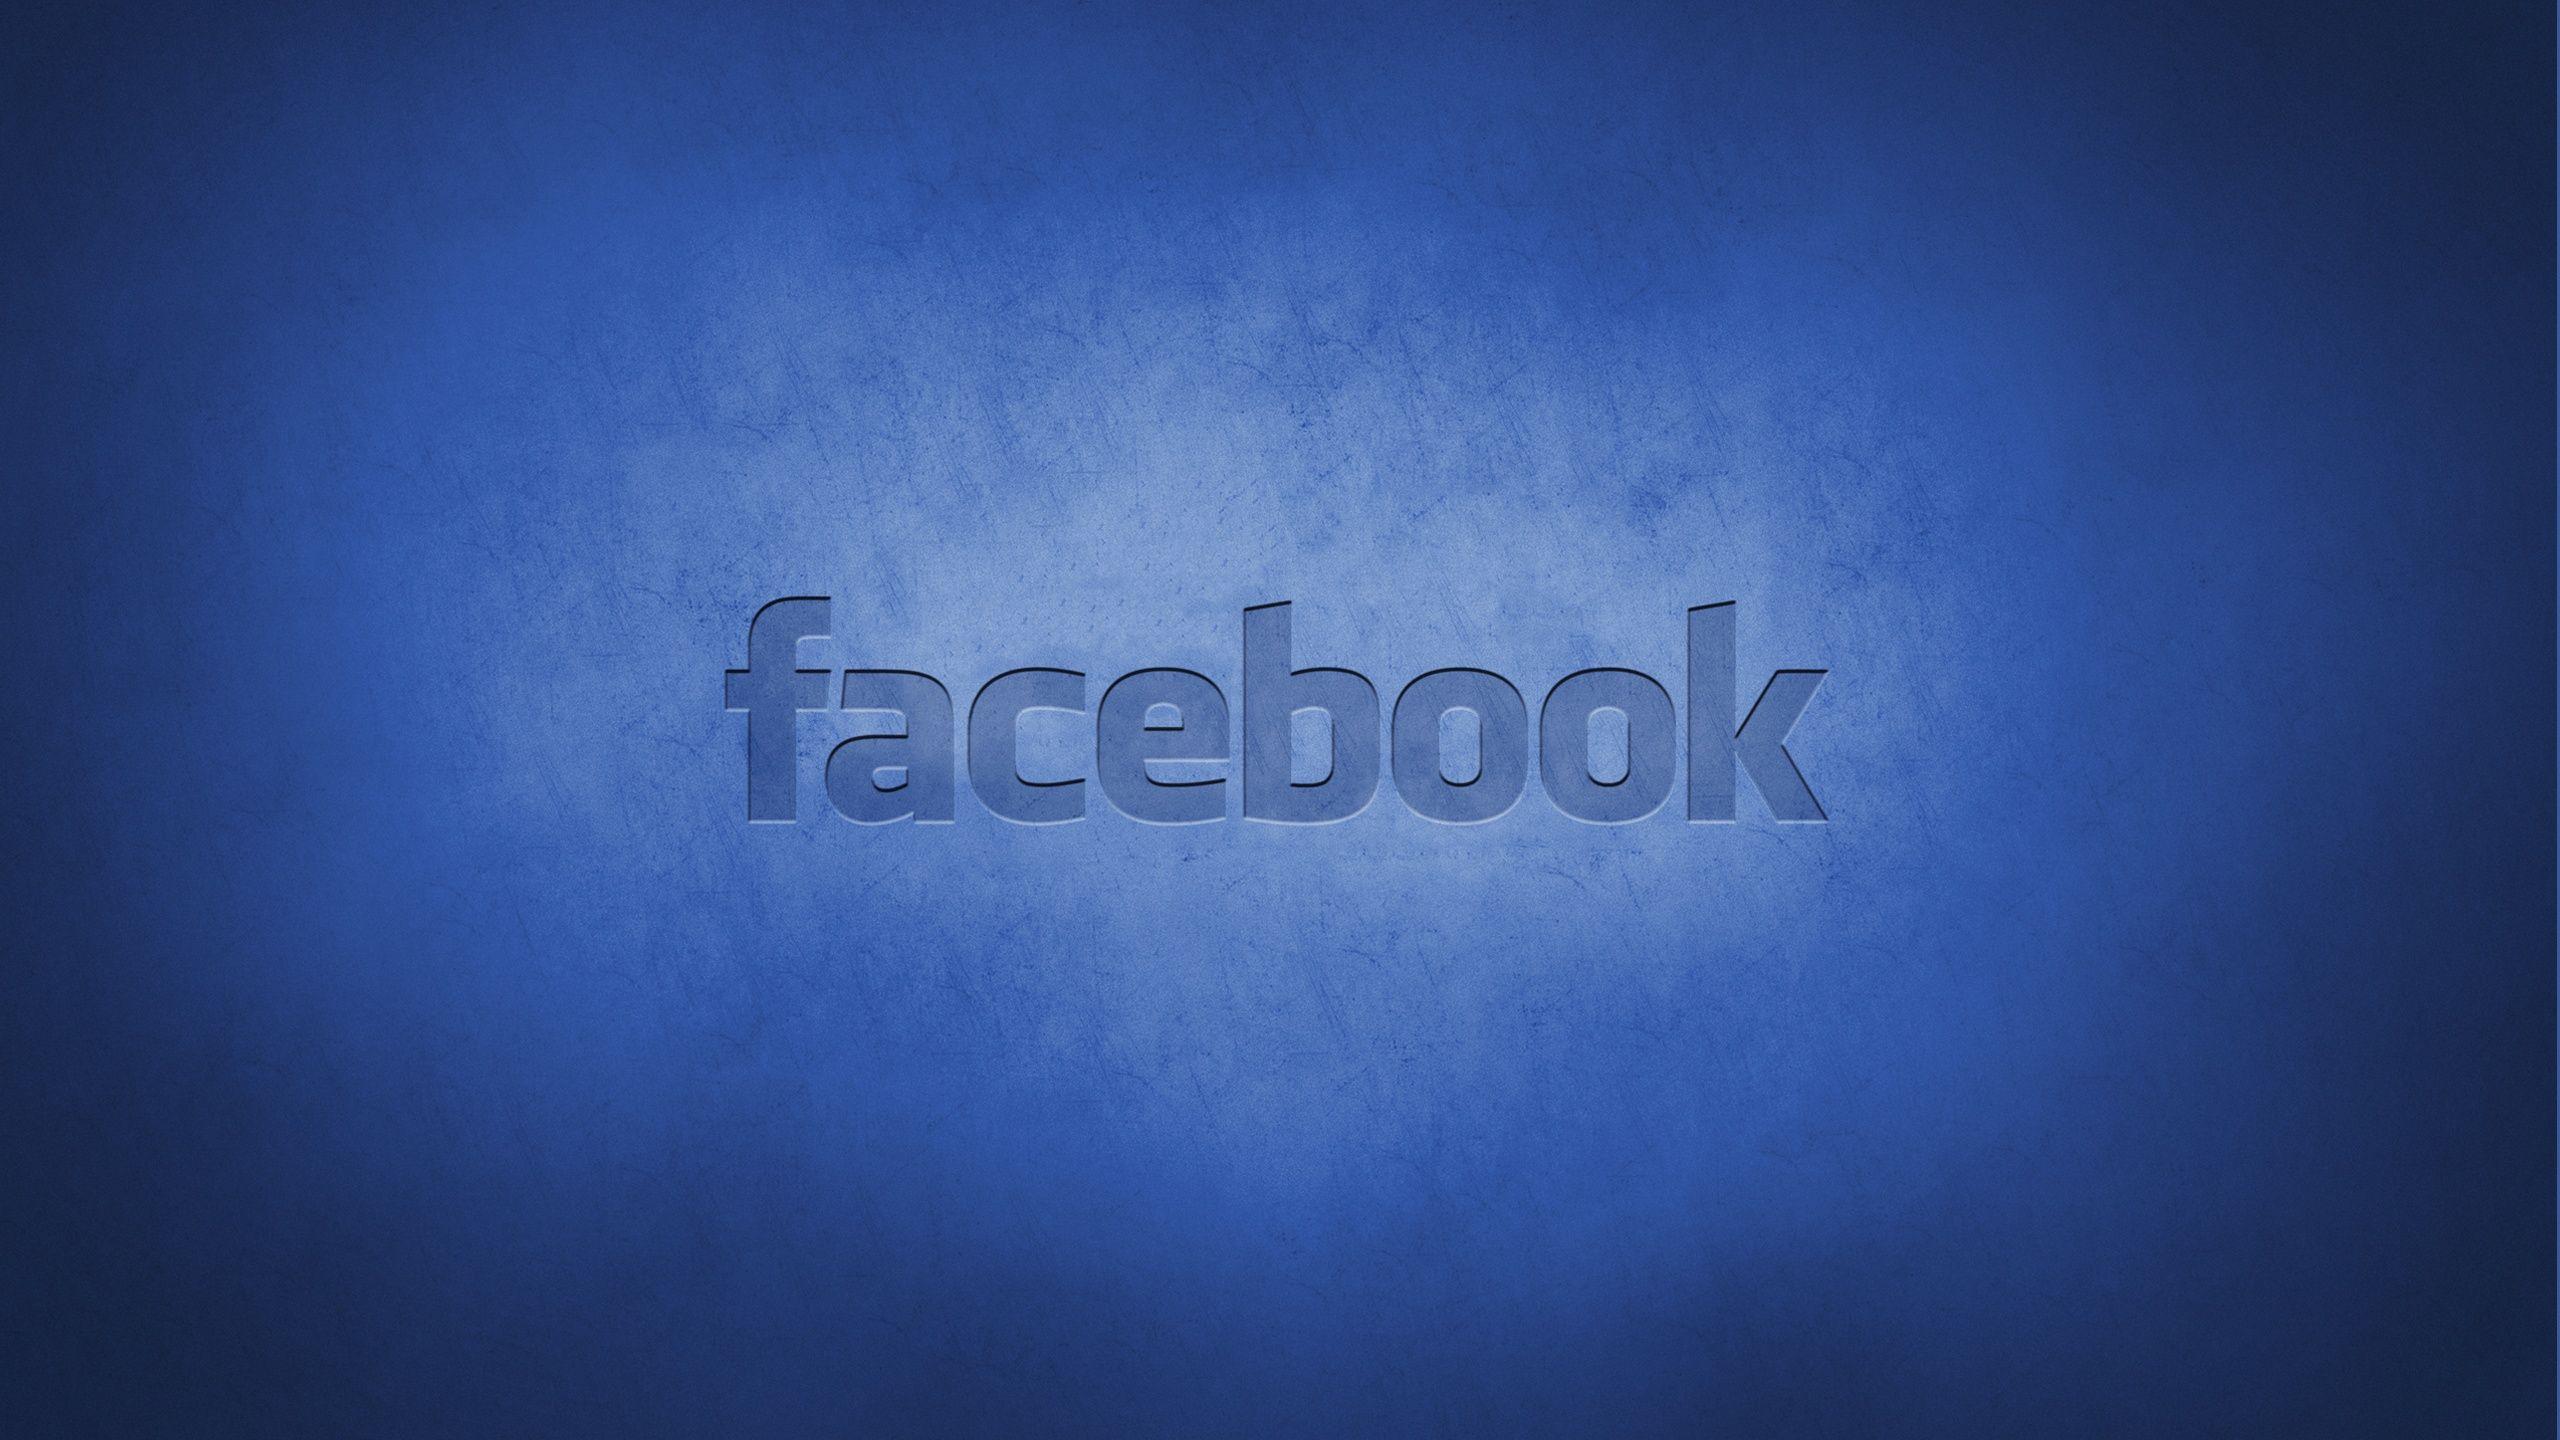 Facebook Full HD Wallpapers and Backgrounds Image